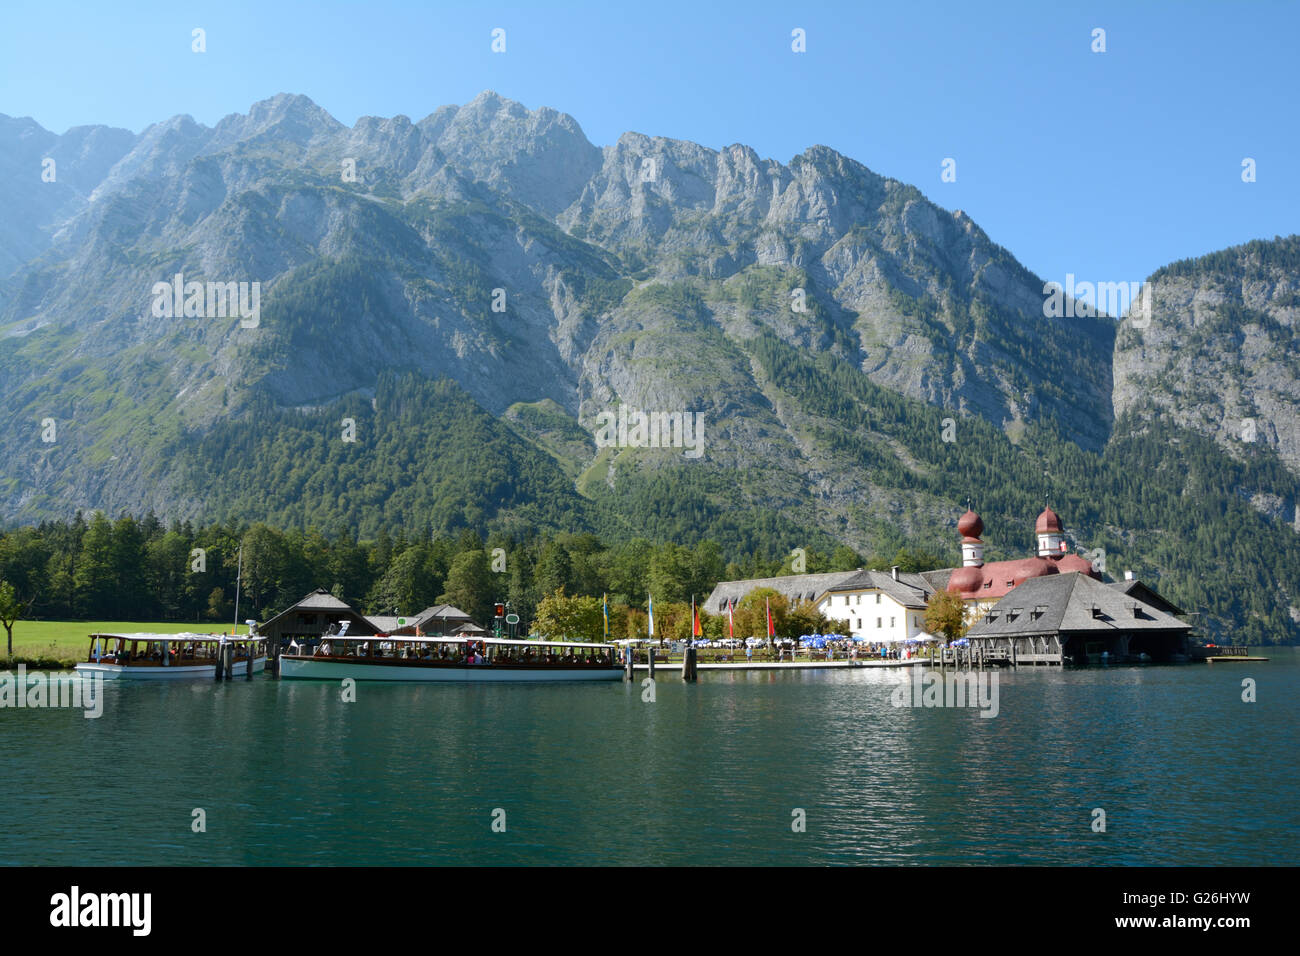 Schonau am Konigssee, Germany - August 30, 2015: Mountains, St. Bartholoma church, other buildings and ships at Koenigssee lake Stock Photo